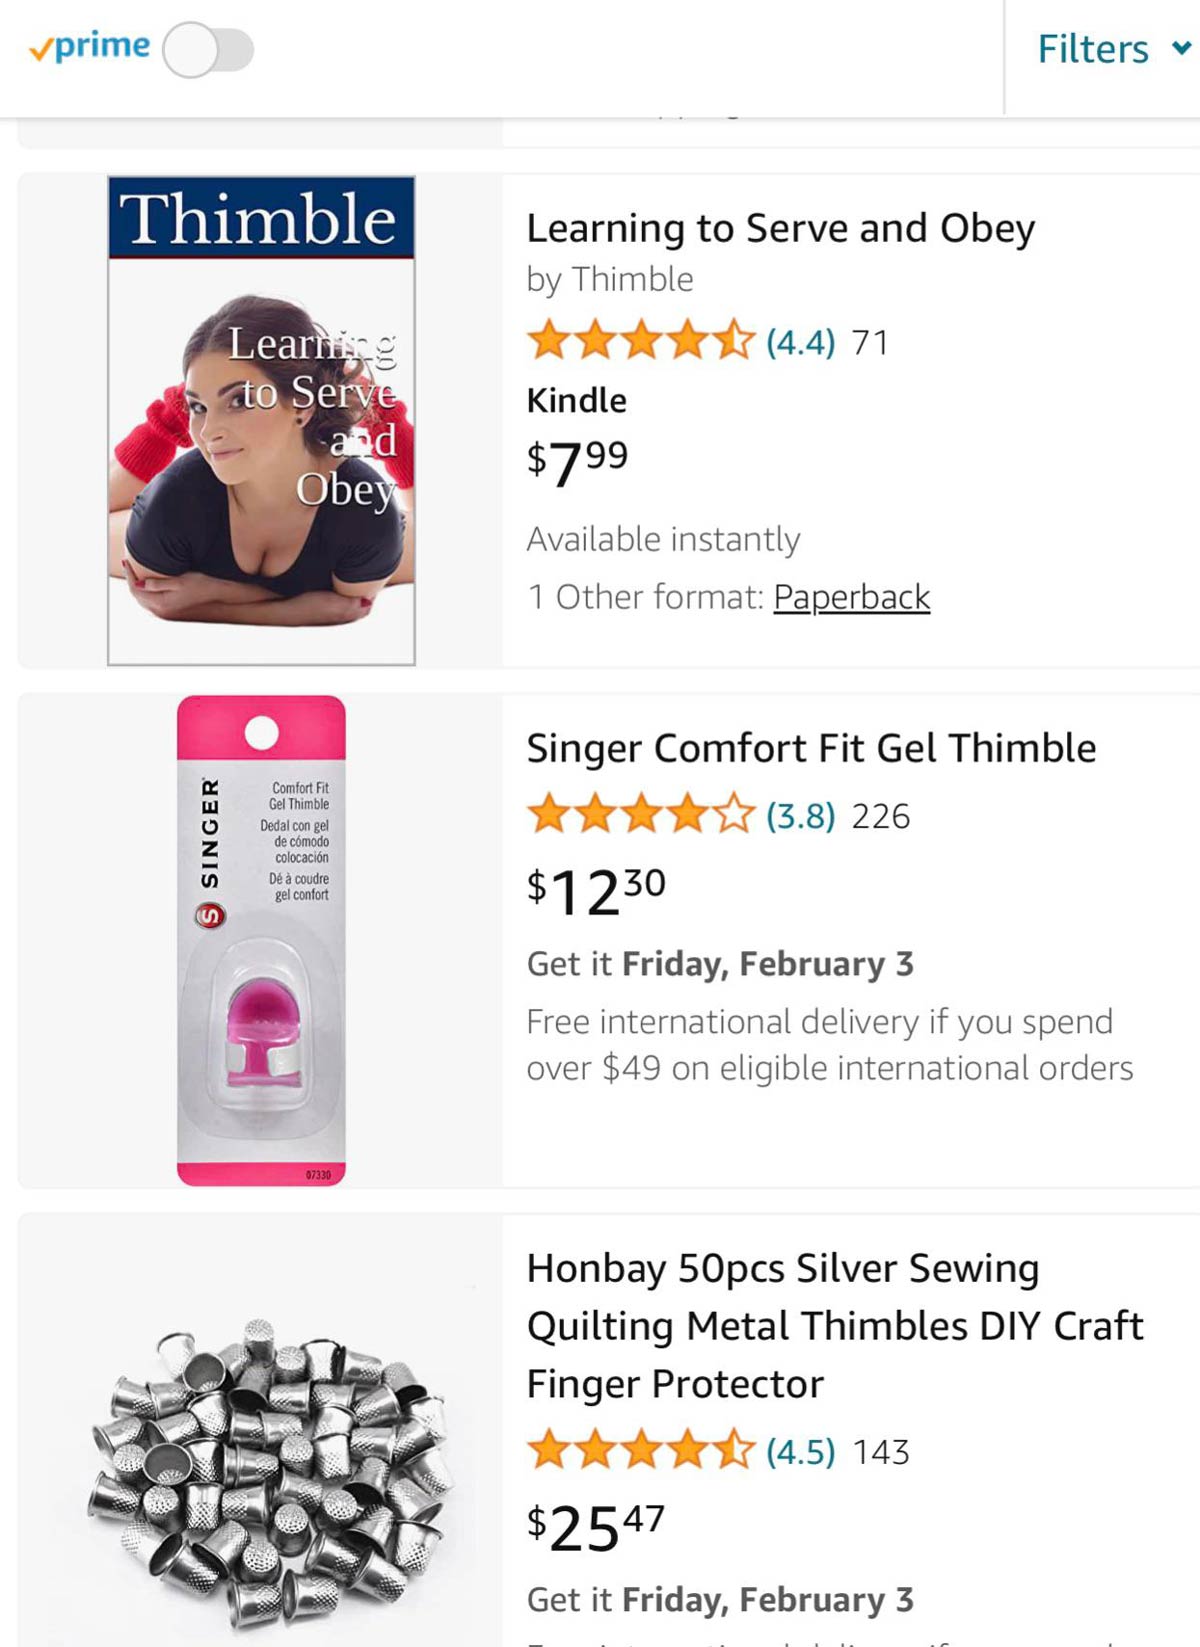 Settle down Amazon. I just need a thimble to complete a craft project